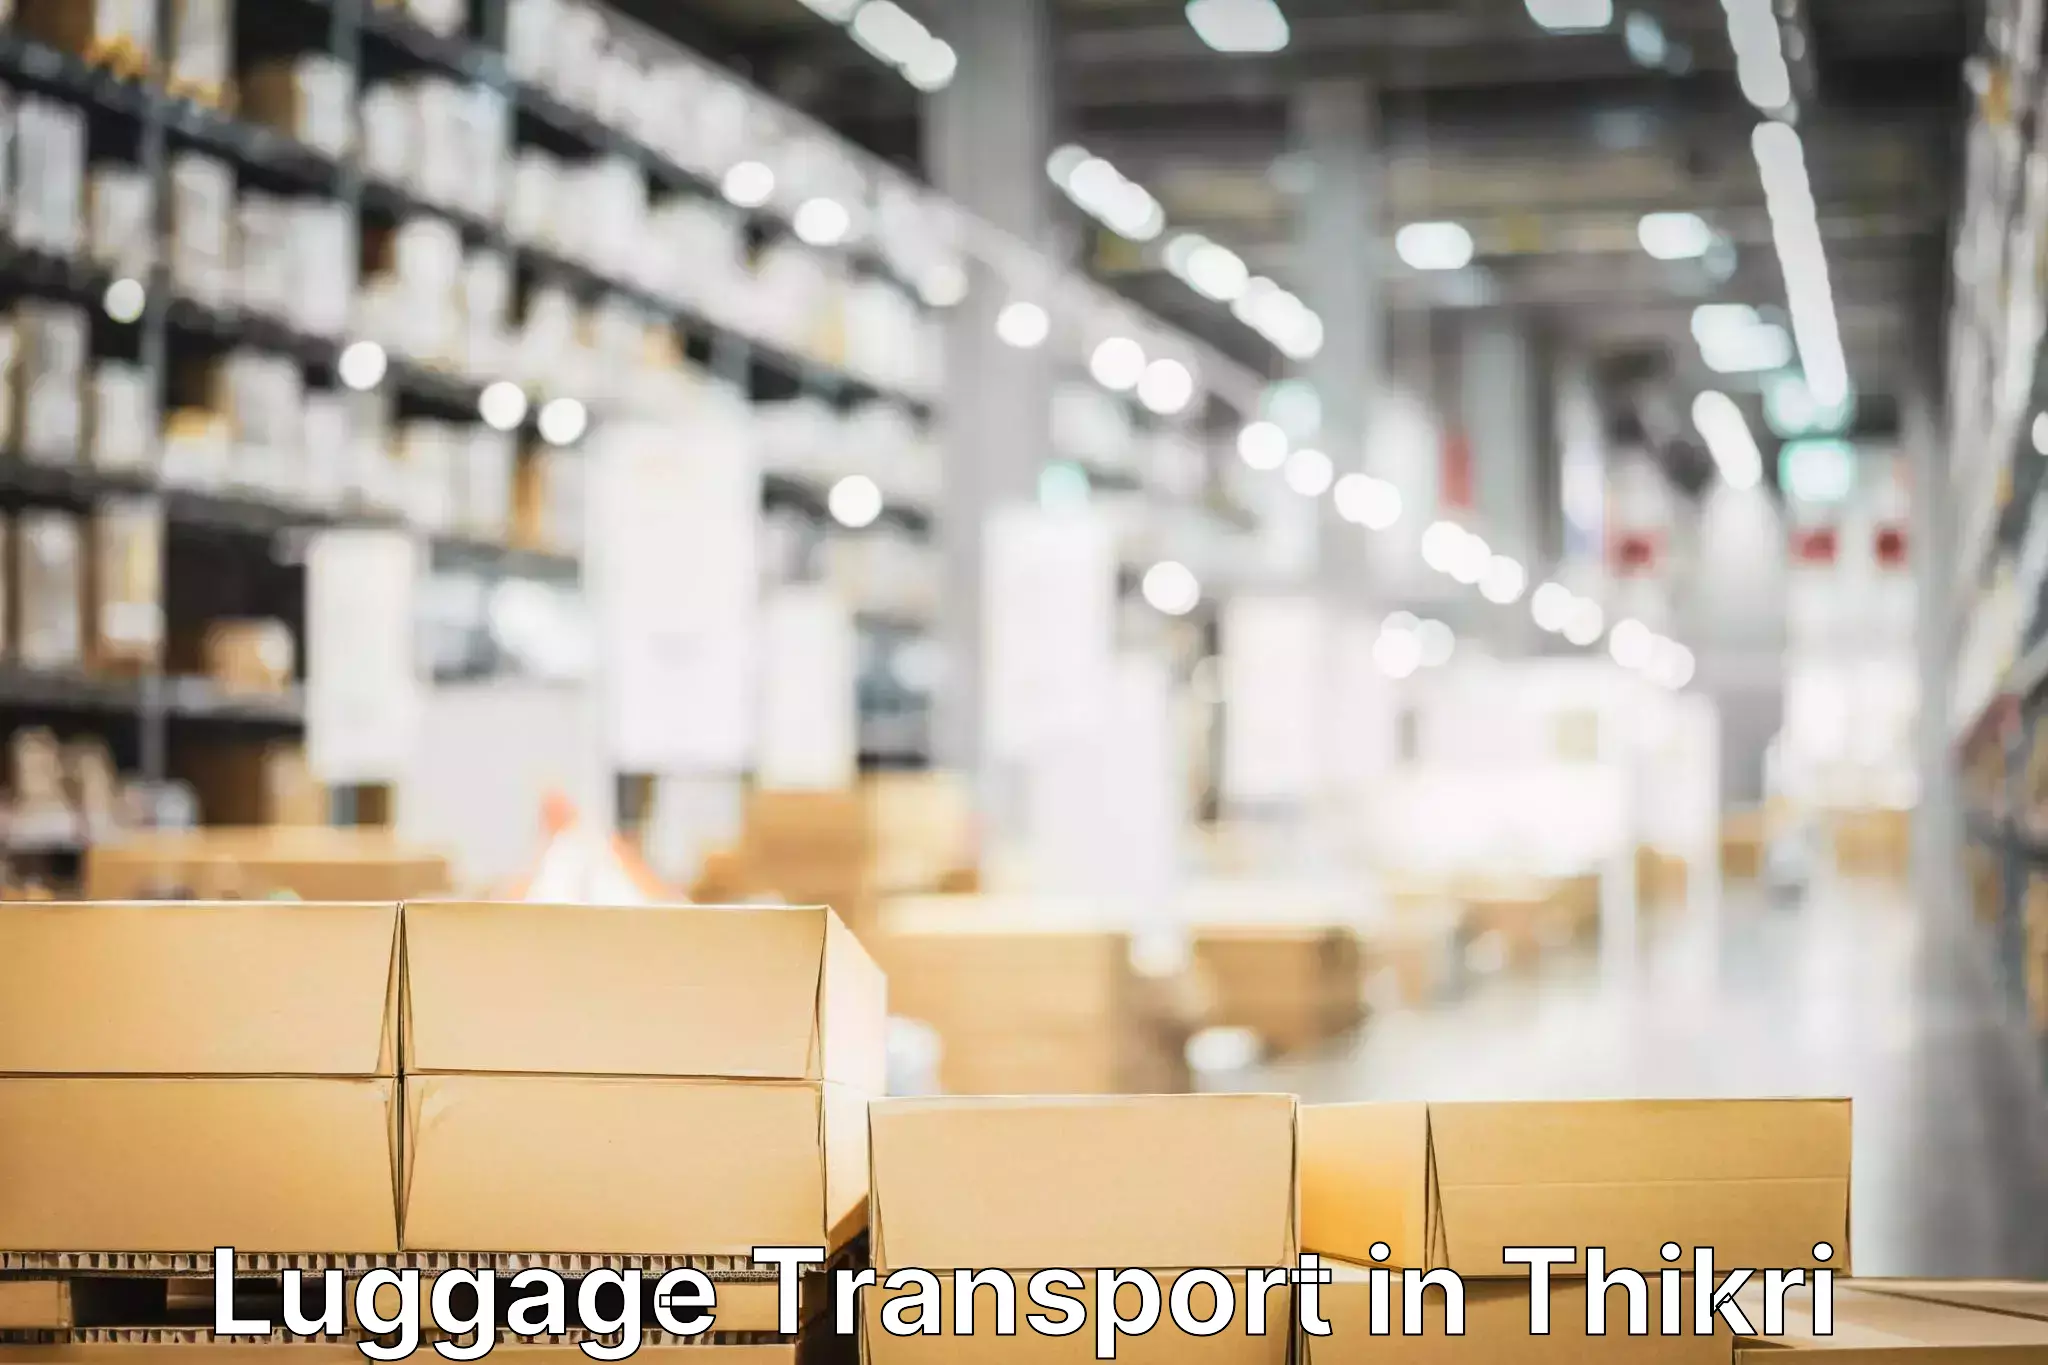 Baggage transport technology in Thikri